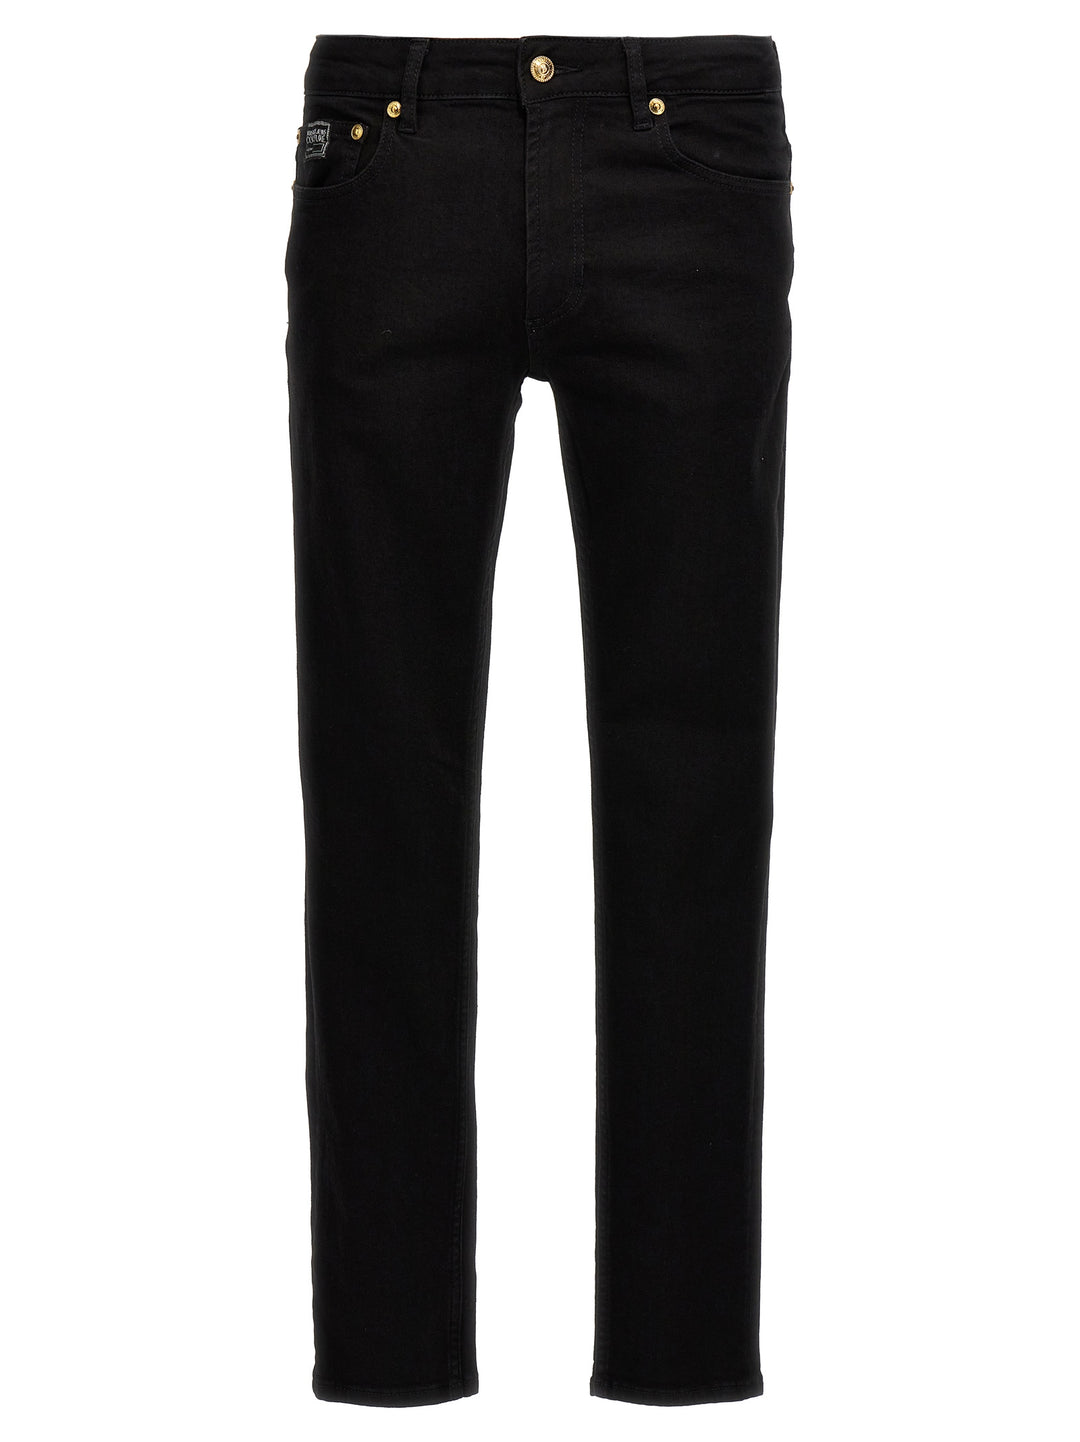 Dundee Jeans Nero